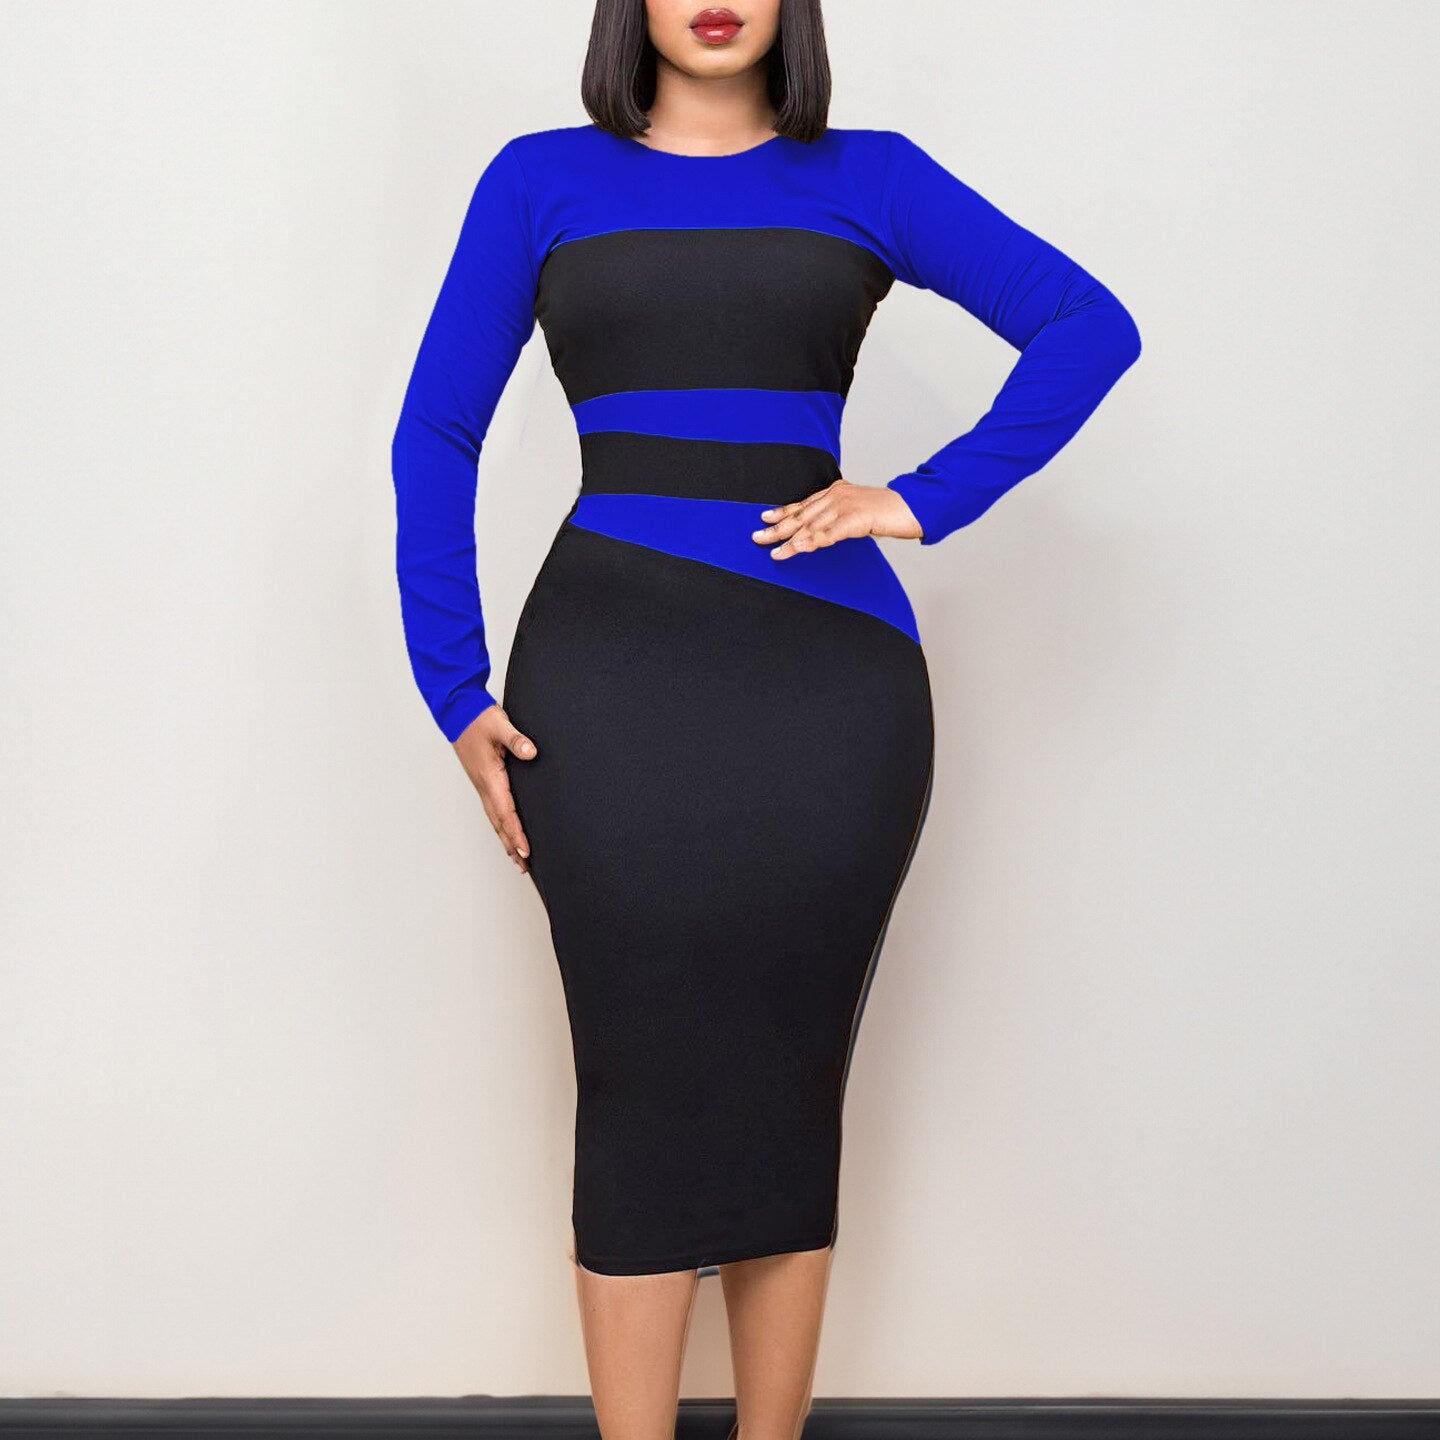 Sultry Elegance: Women's Round Neck Long Sleeve Sex Dress